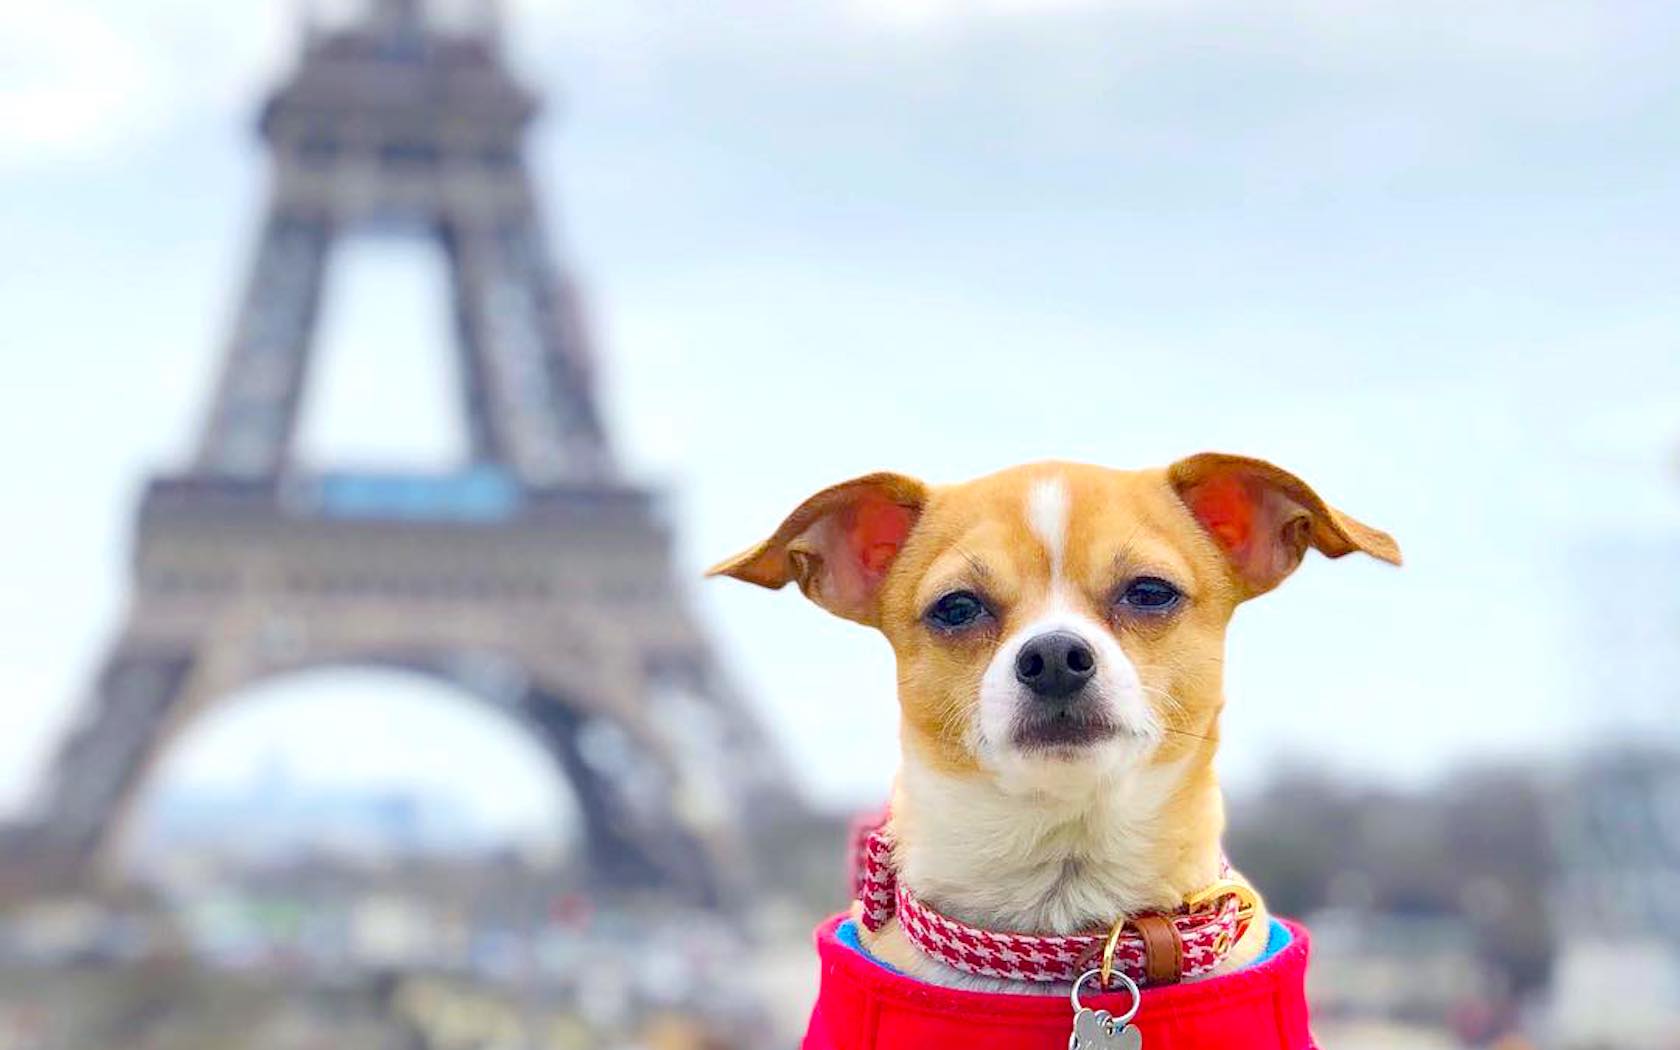 Jonathan Warren the chihuahua serving up serious travel inspiration in front of the Eiffel Tower